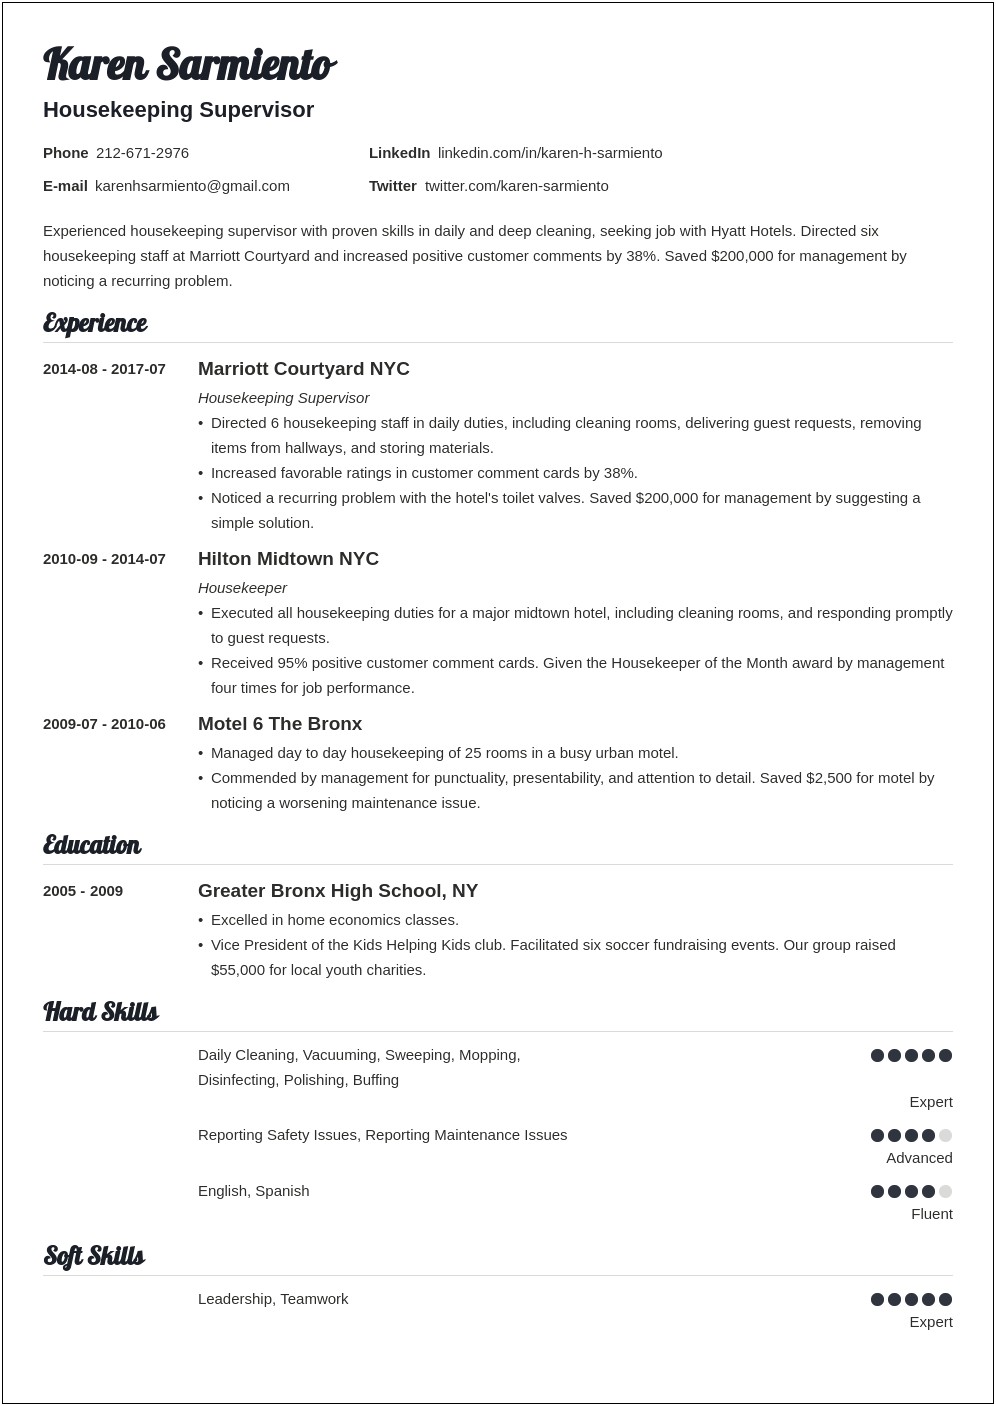 Resume Templates For Housekeeping Jobs